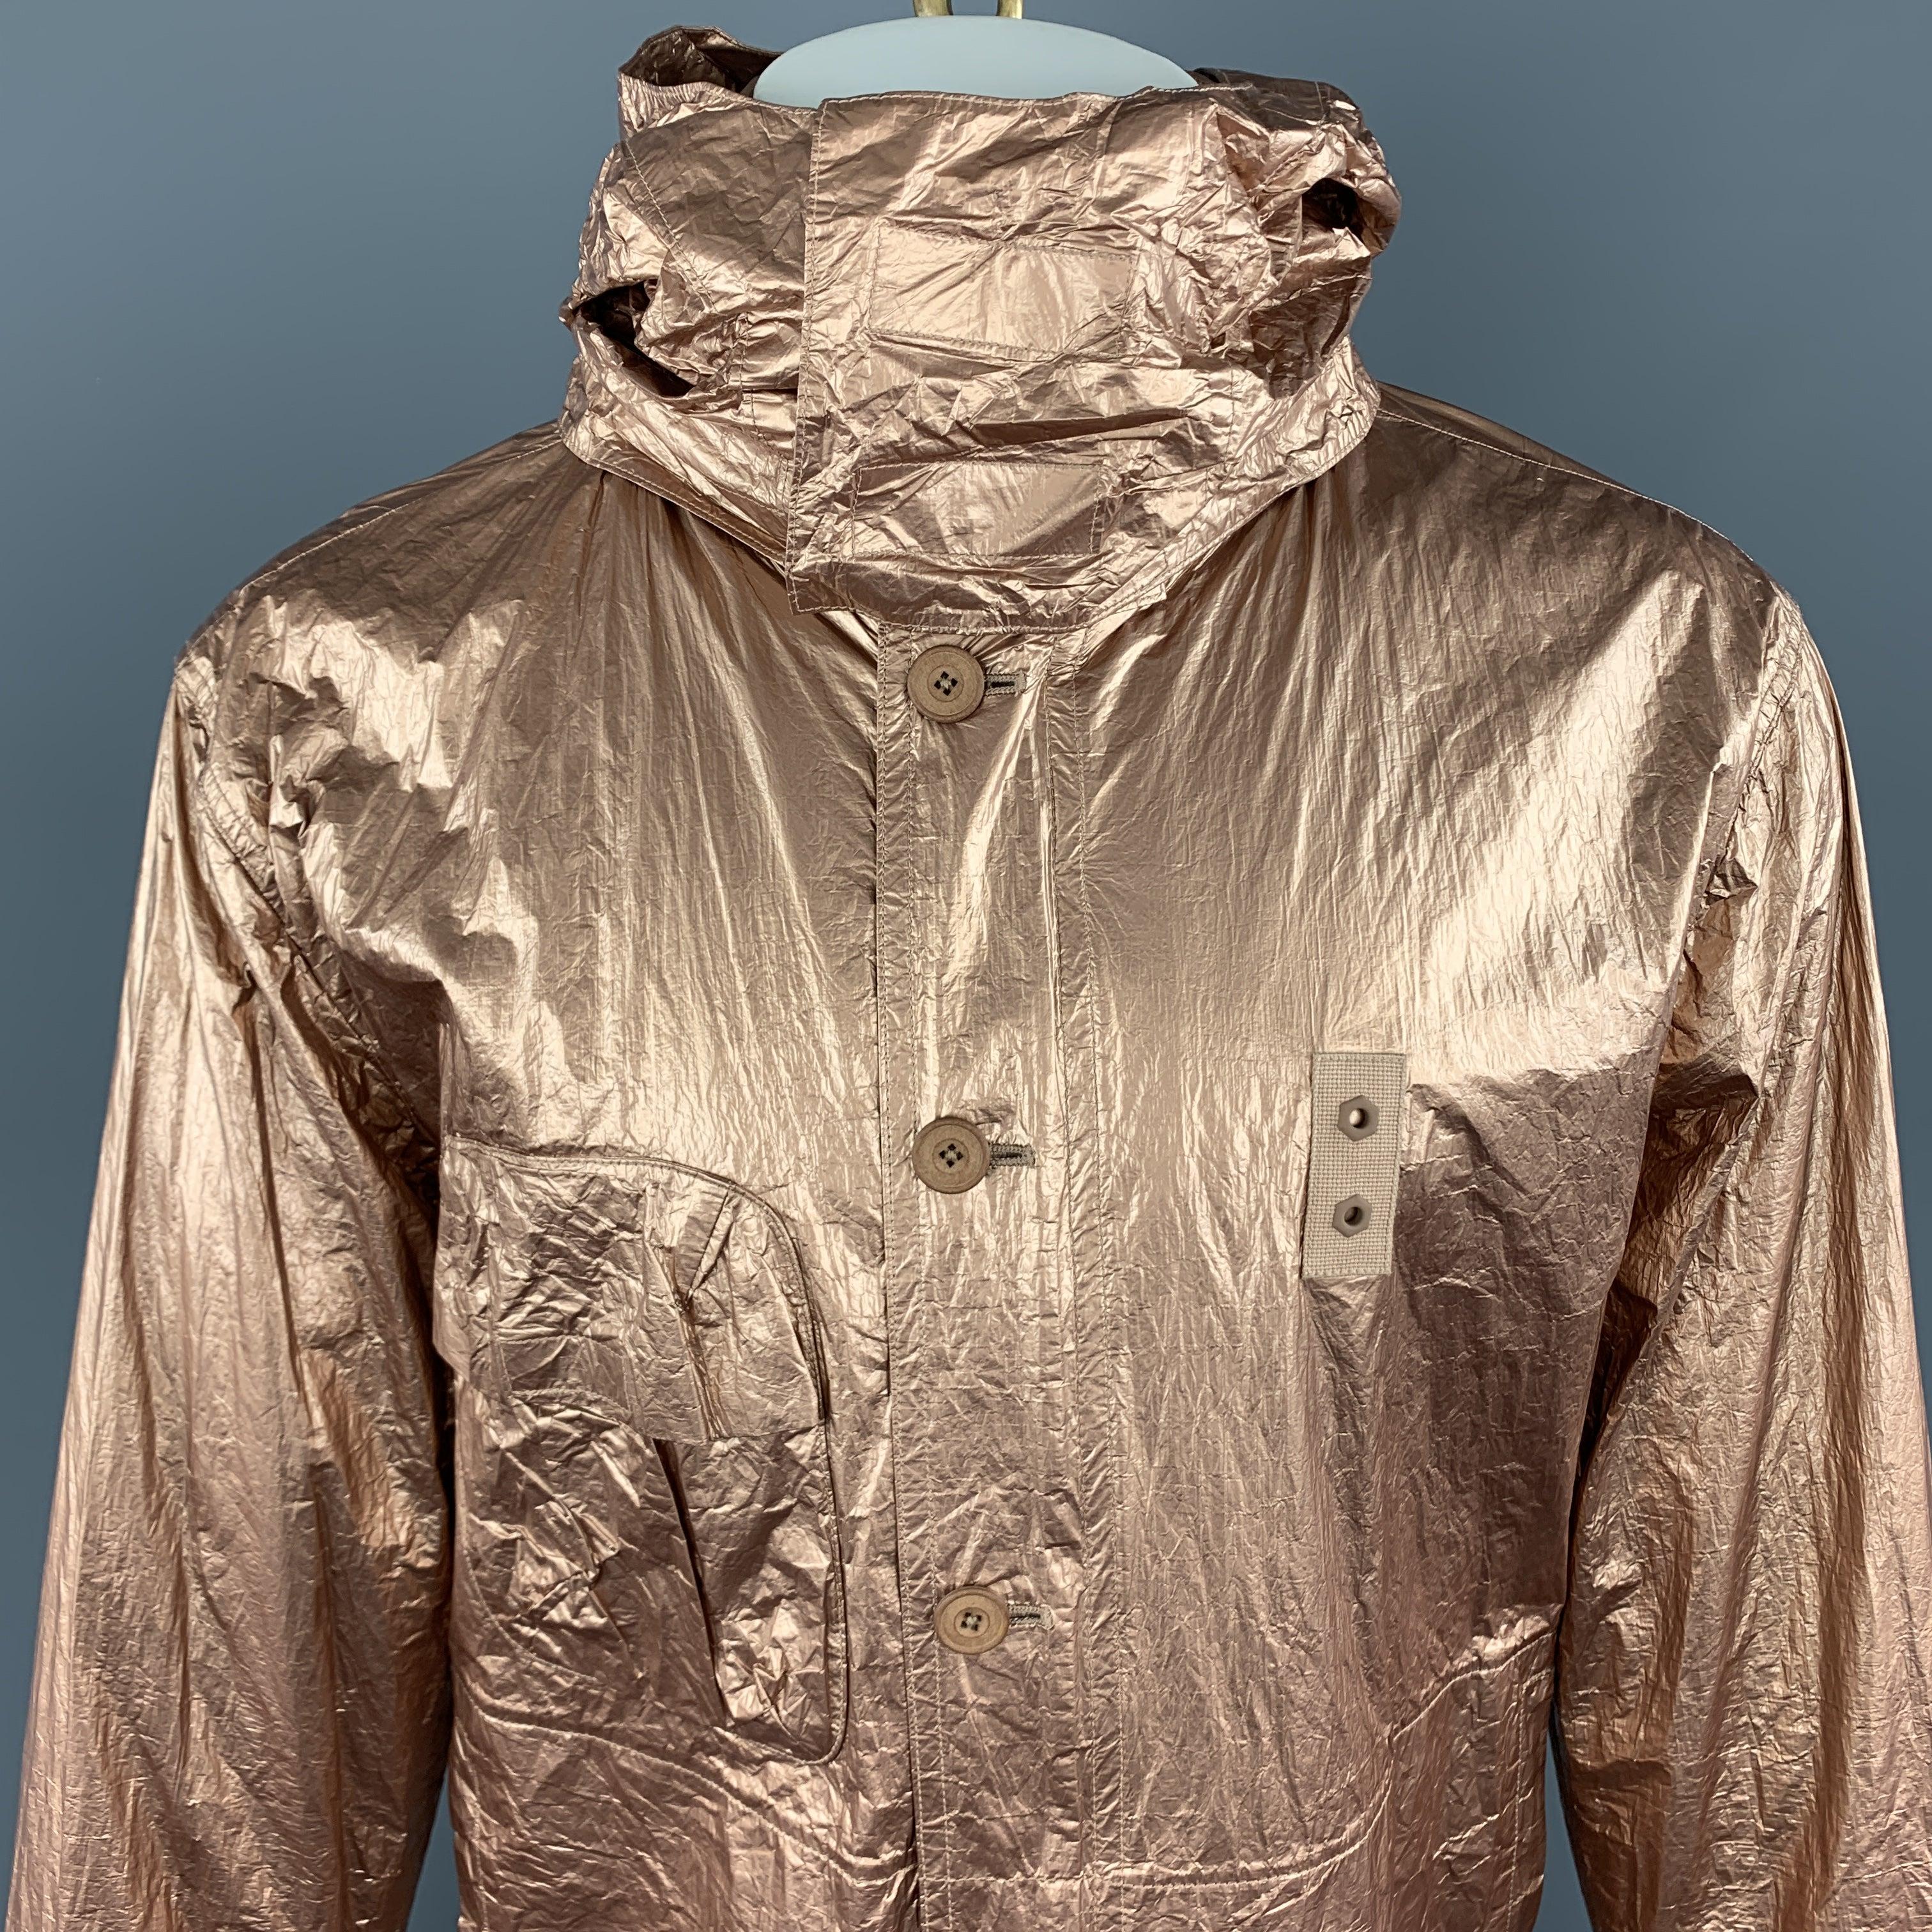 HELMUT LANG windbreaker jacket comes in metallic copper gold coated Tyvek with a zip hood baseball collar, double zip front with button placket, flap chest pocket, and lace up sides.
Very Good
Pre-Owned Condition. 

Marked:   M 

Measurements: 
